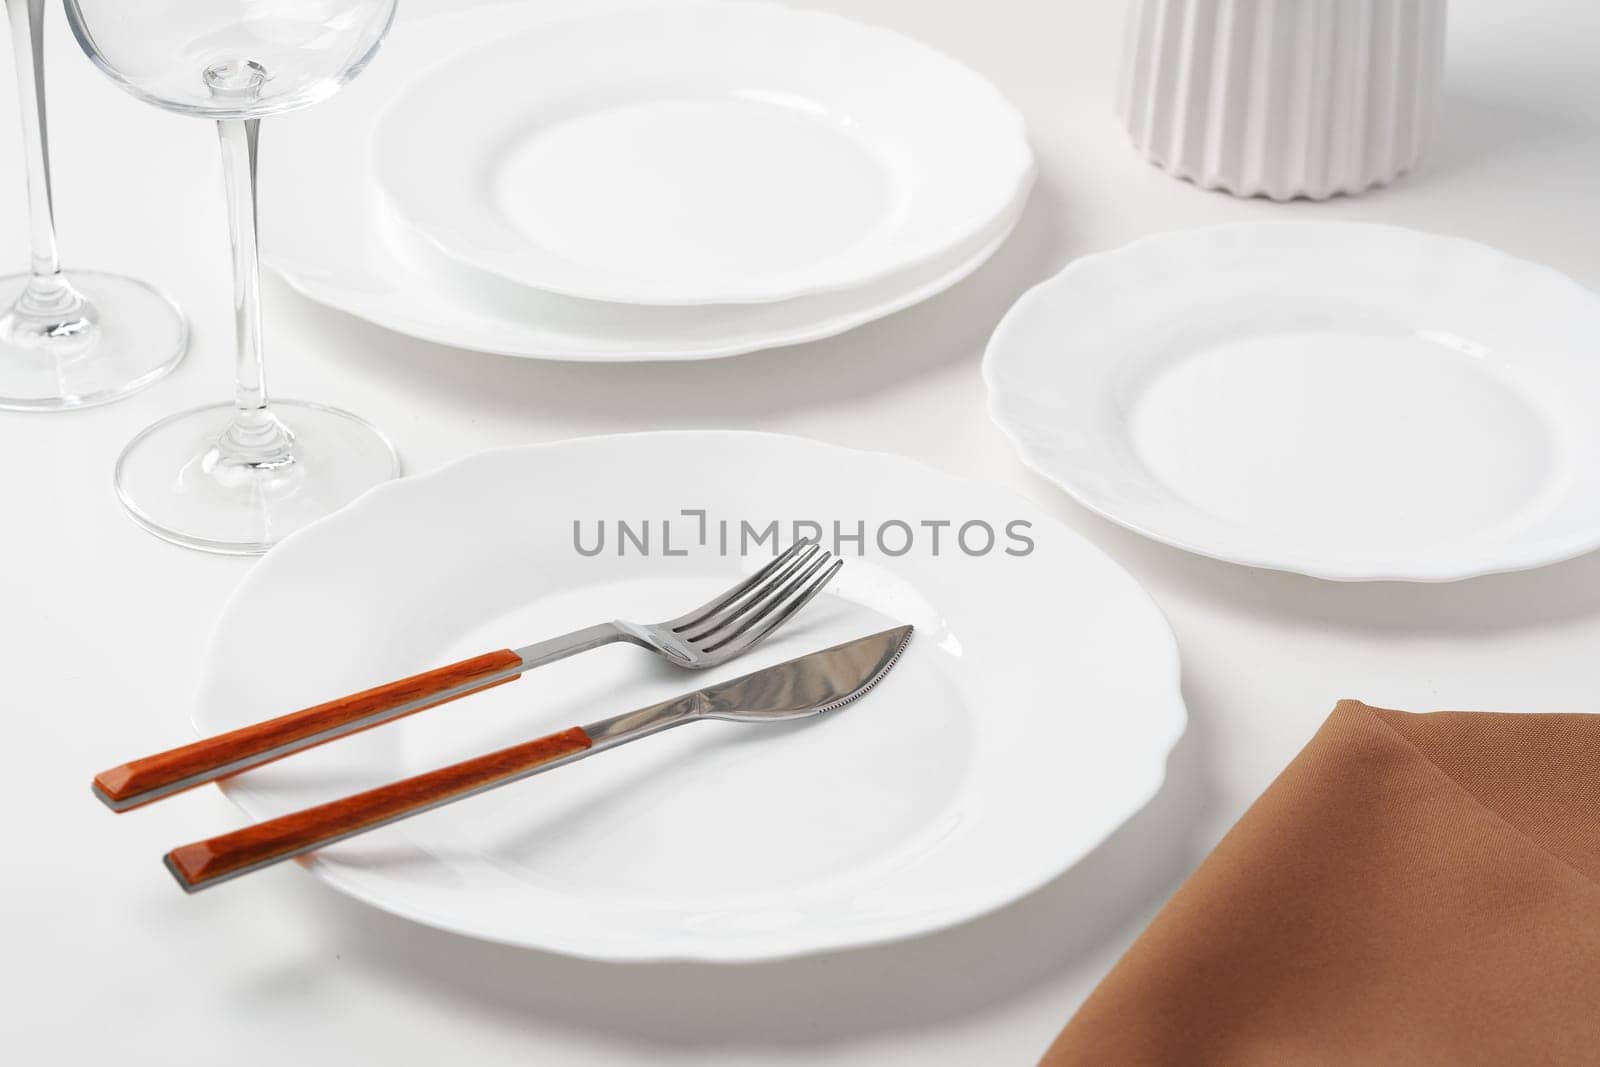 Stylish table setting with white dishware on white tablecloth close up